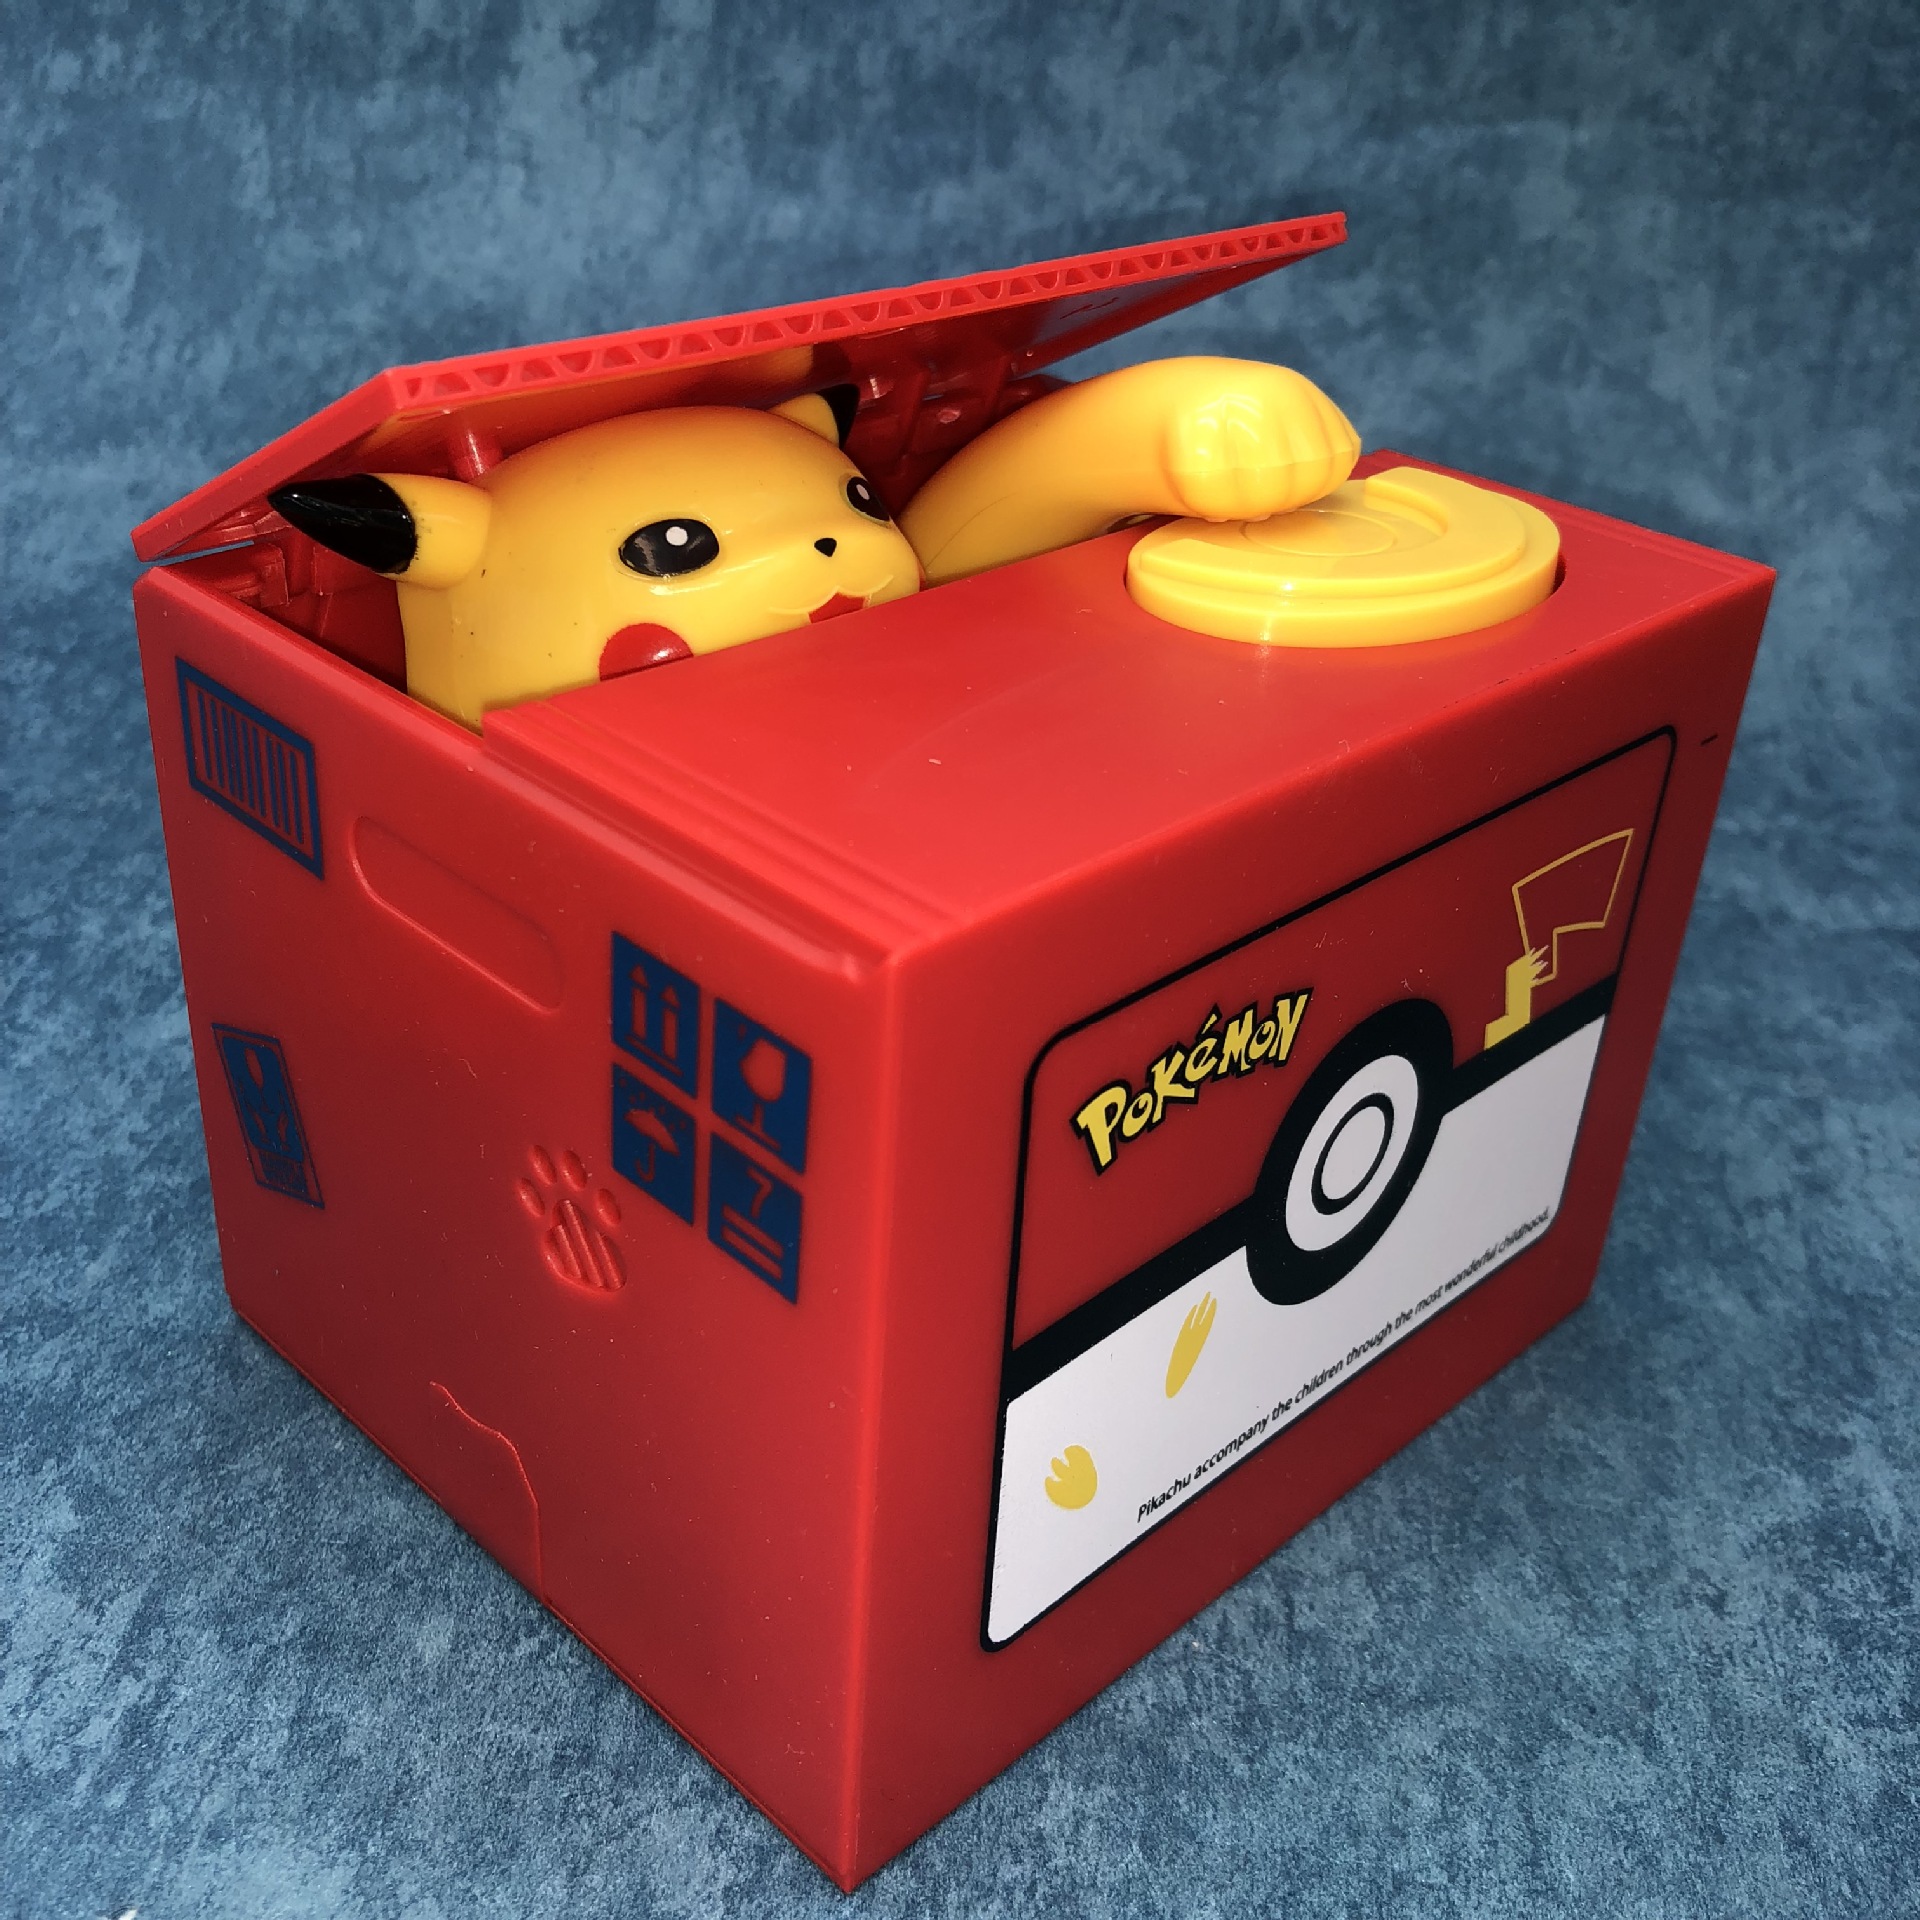 Interestingsport Limited Edition Creative Anmial Pikachu Automated Stealing Piggy Bank Toy Coin Bank Money Banks Coin Can for Kids 